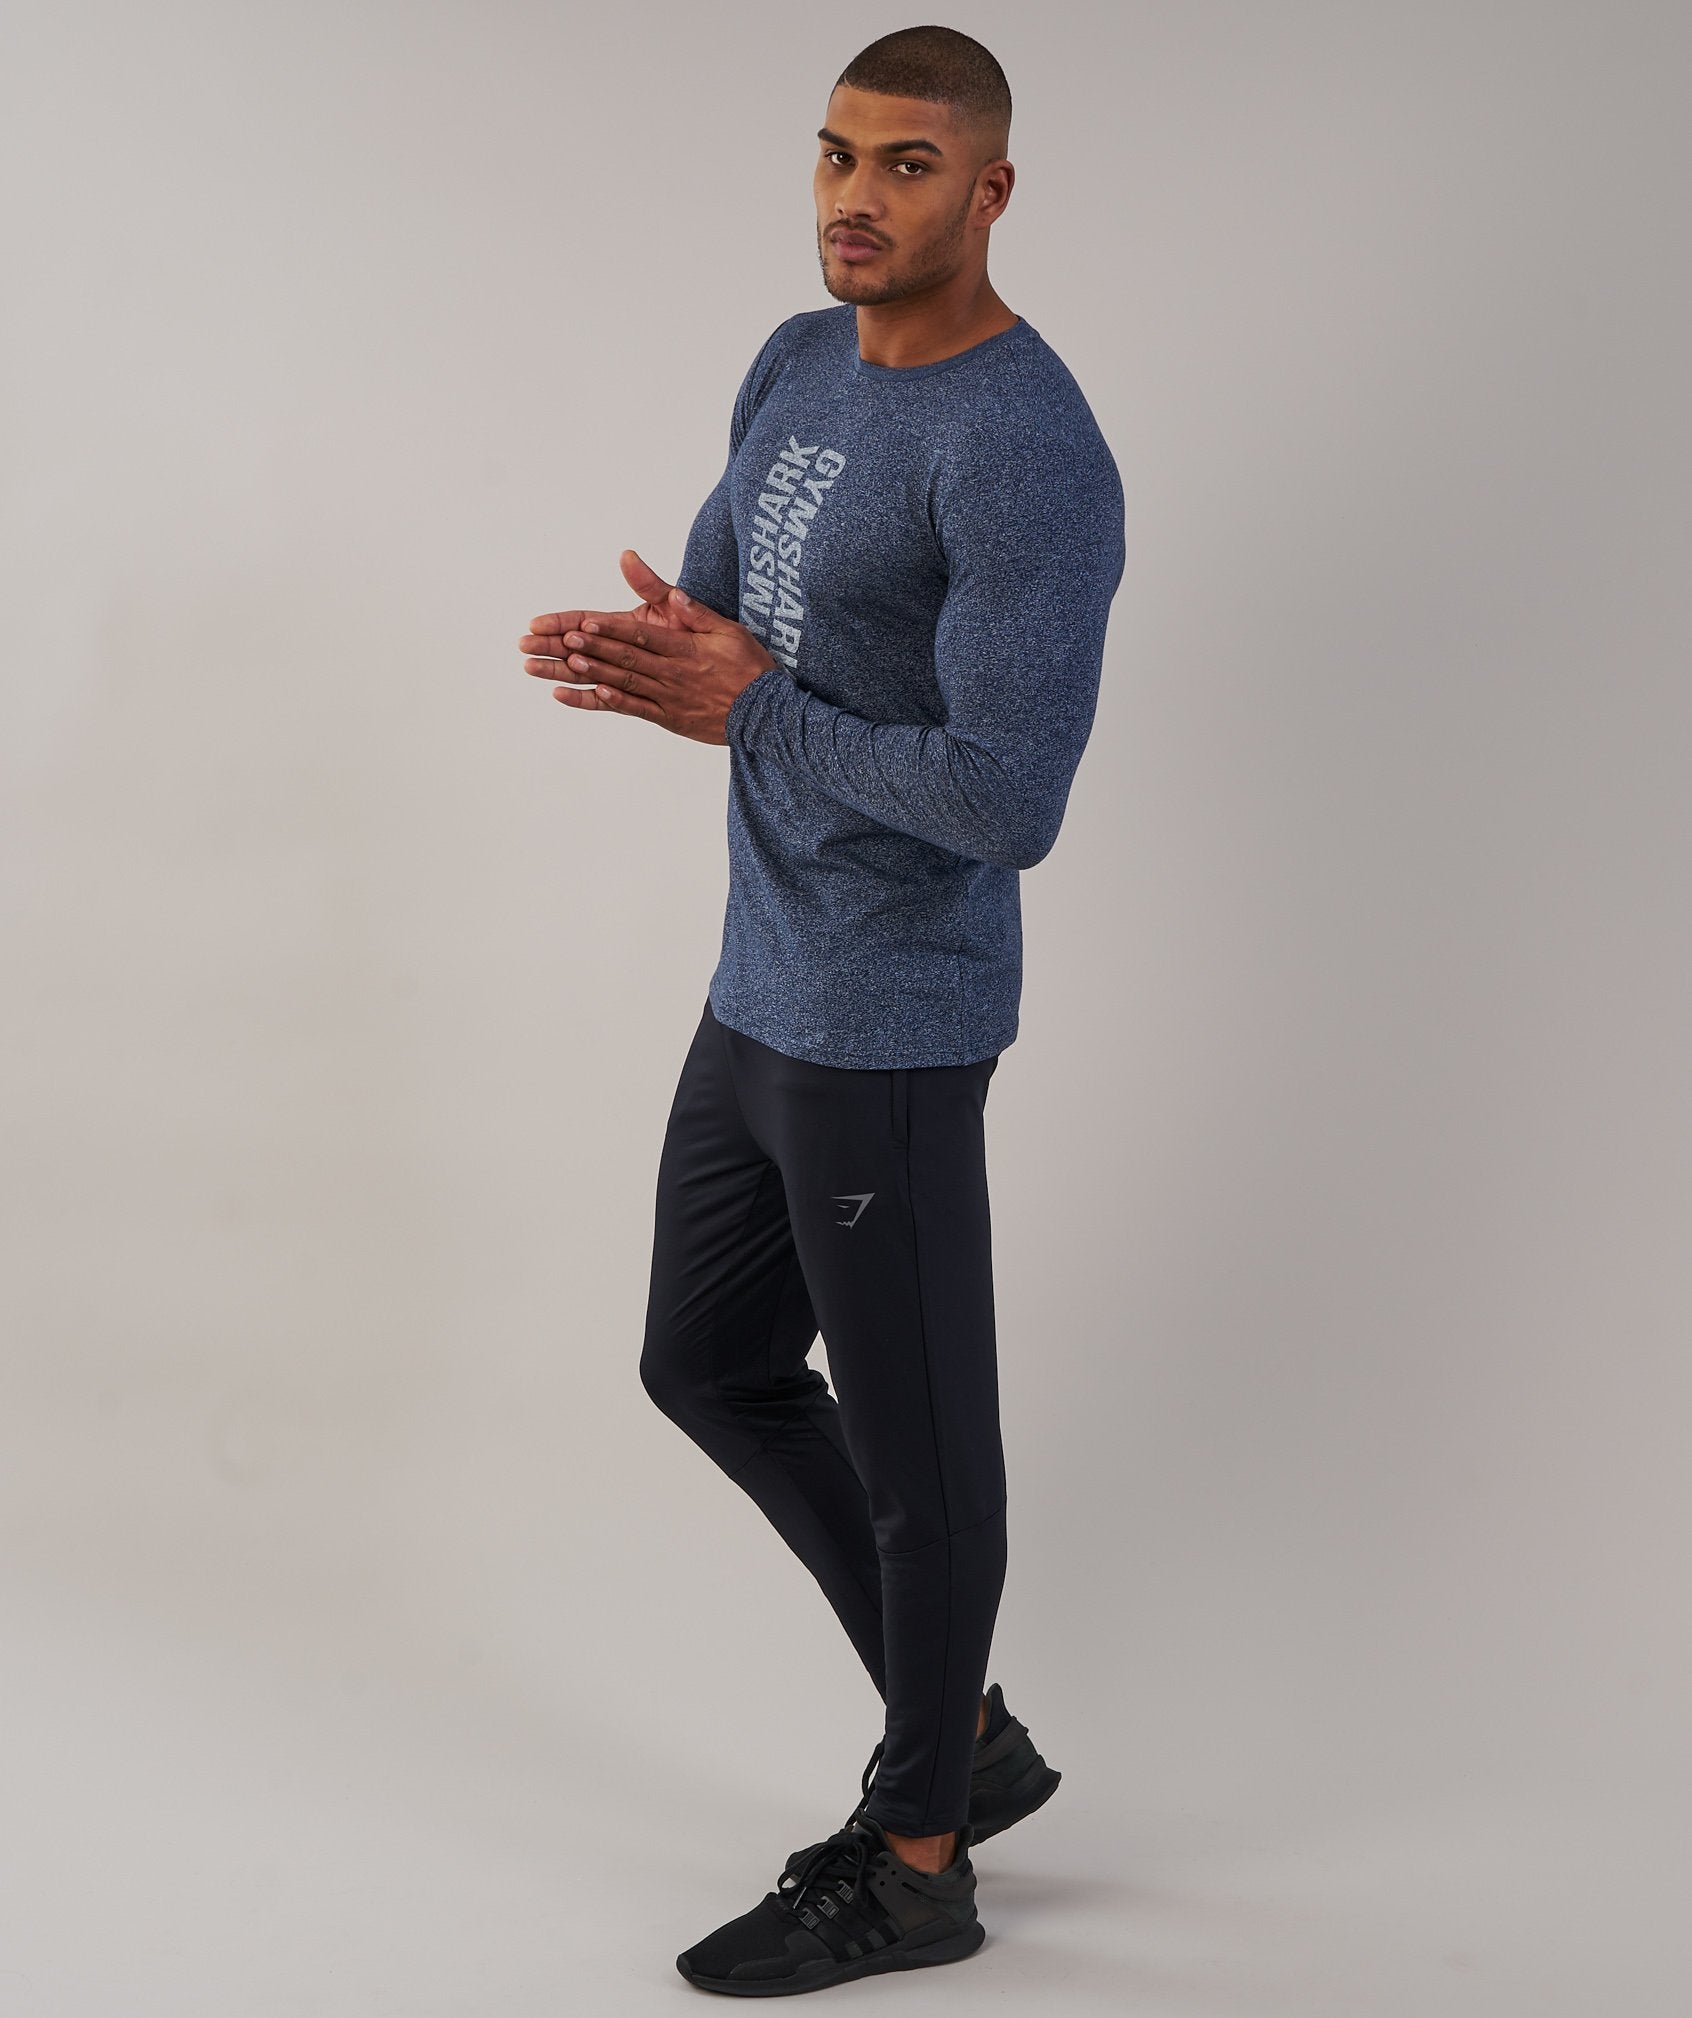 Statement Long Sleeve T-Shirt in Sapphire Blue Marl - view 4